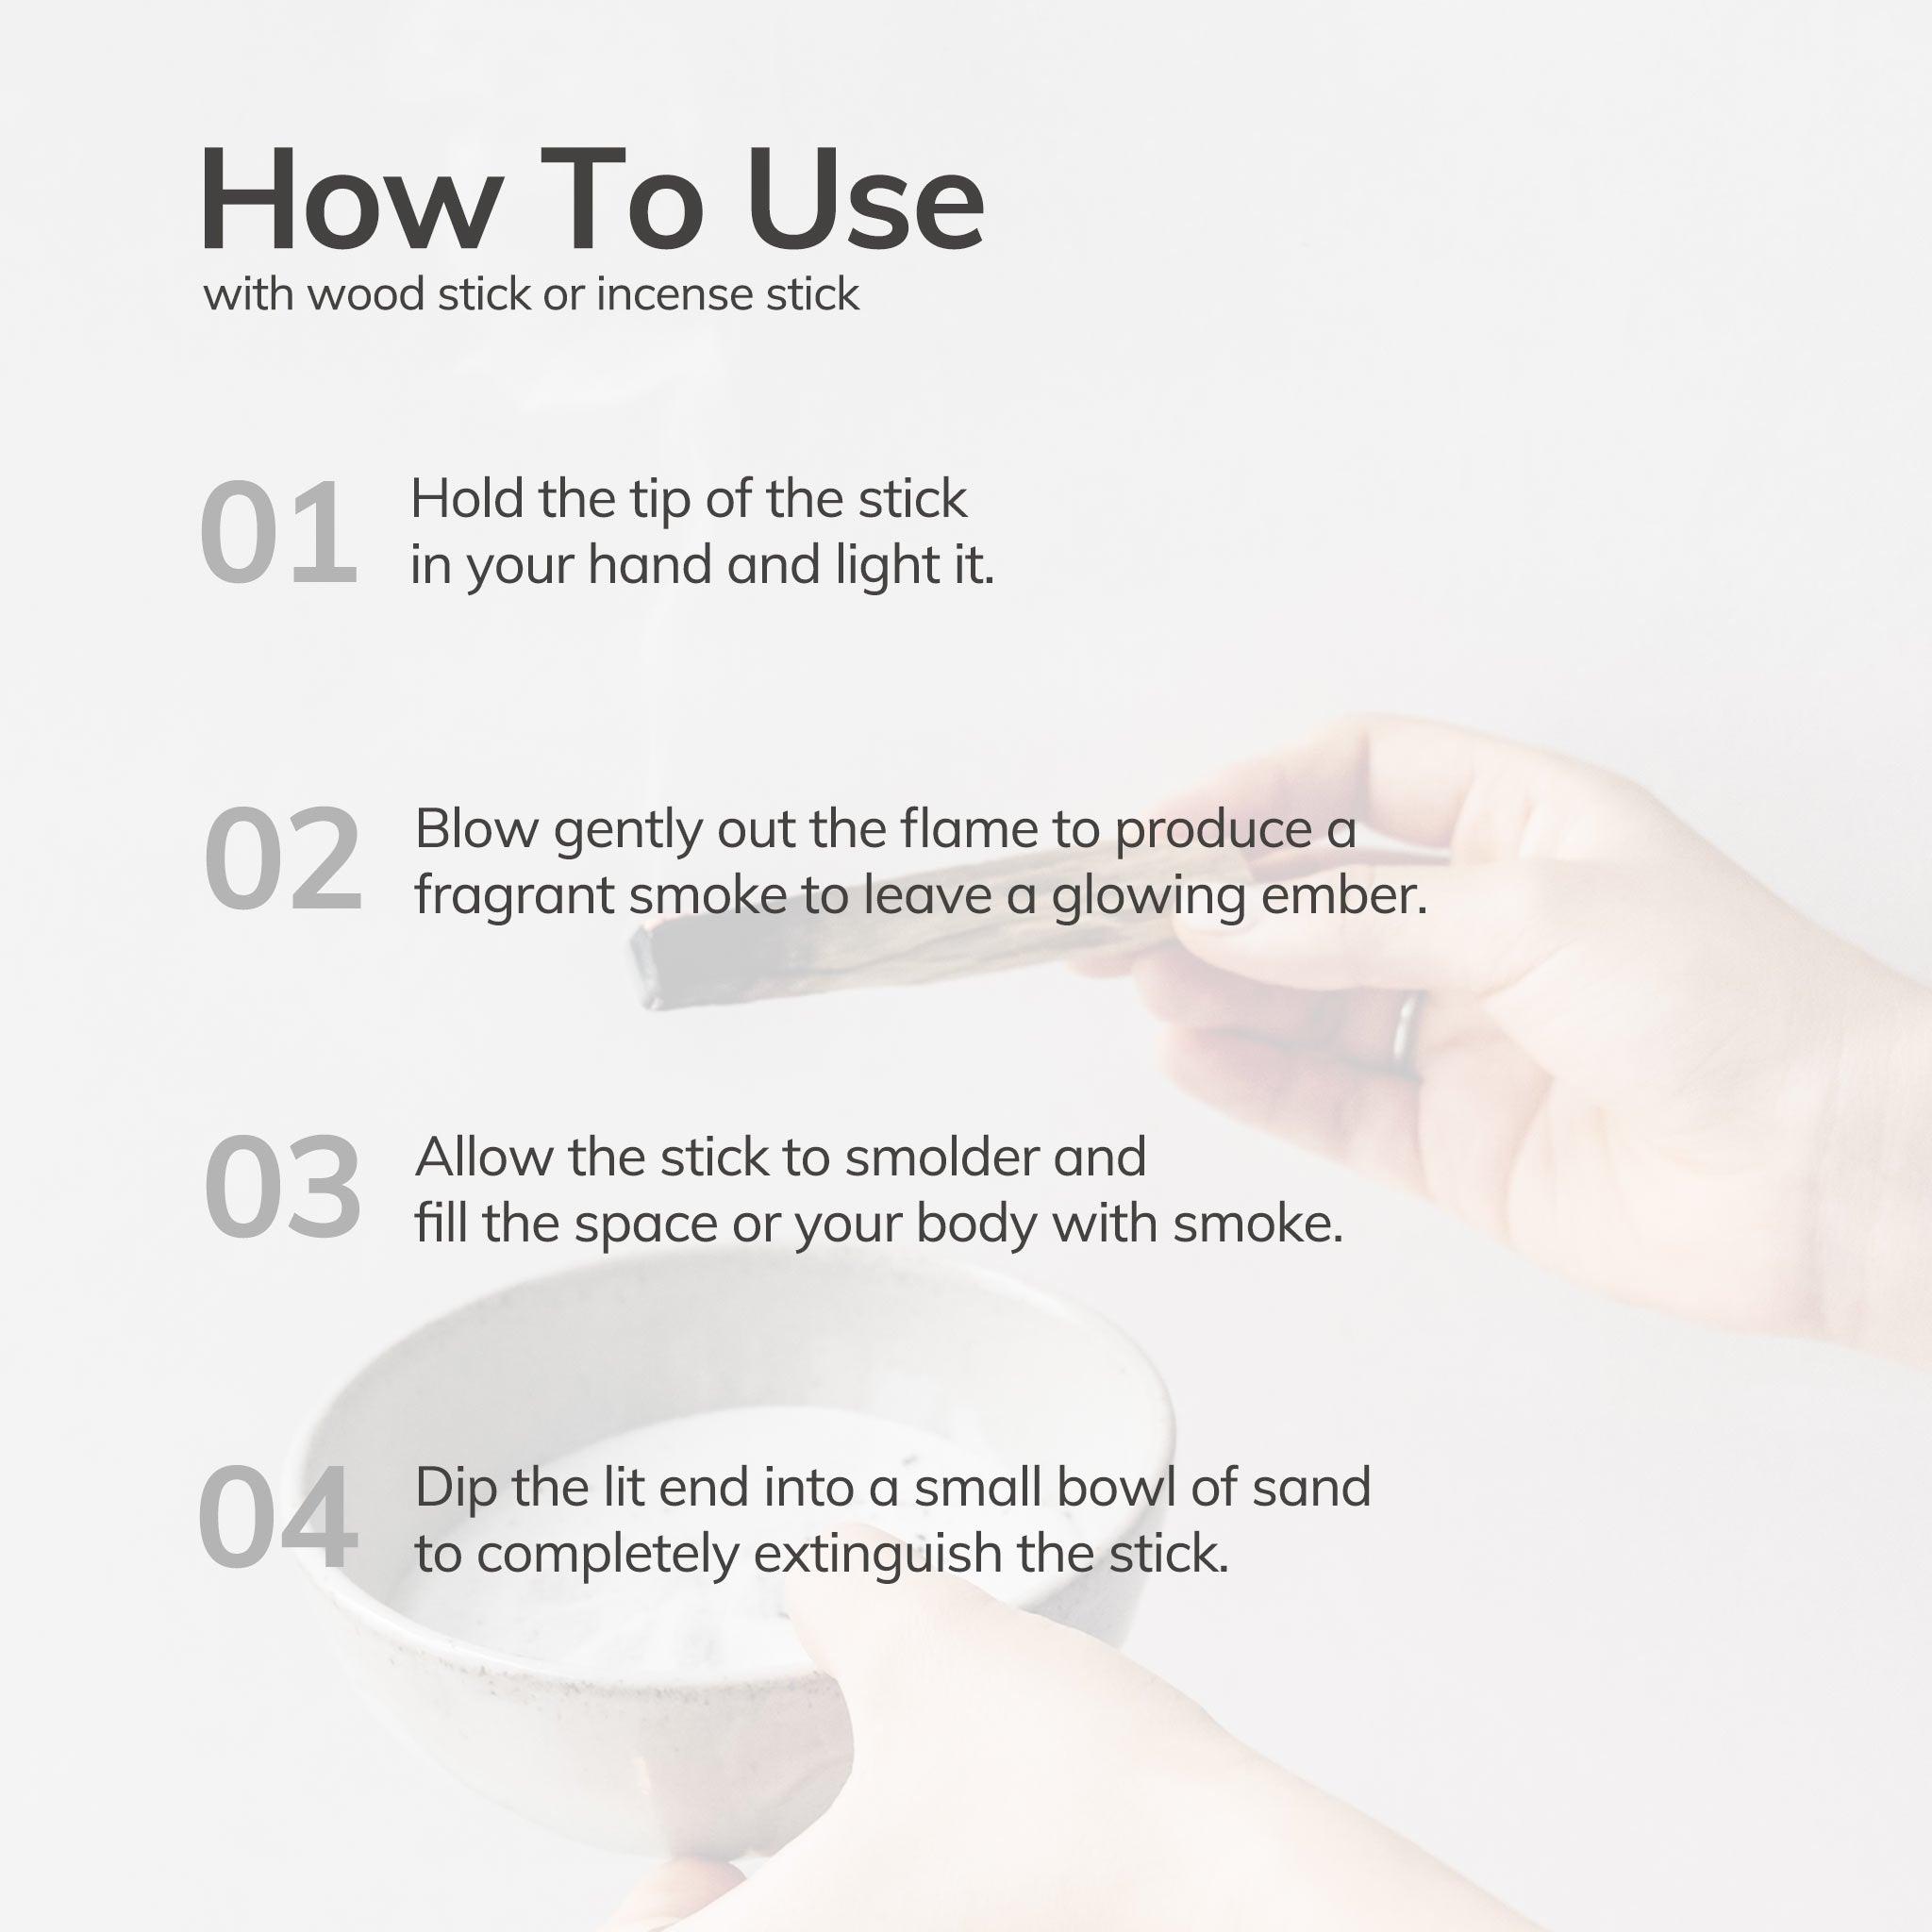 Step by step explaining how to use with smudge stick.